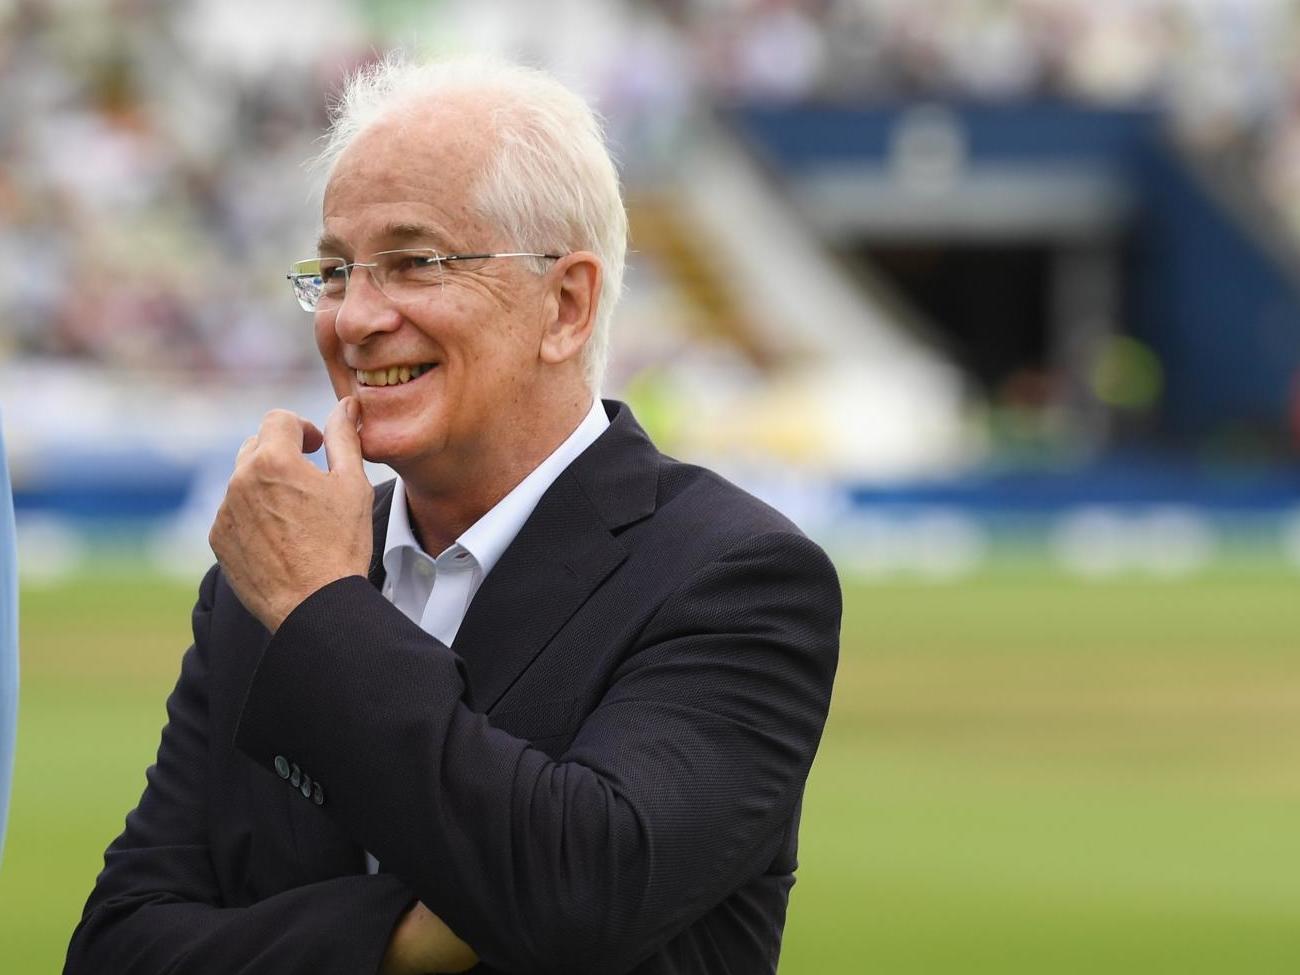 David Gower, the former England cricket captain and broadcaster